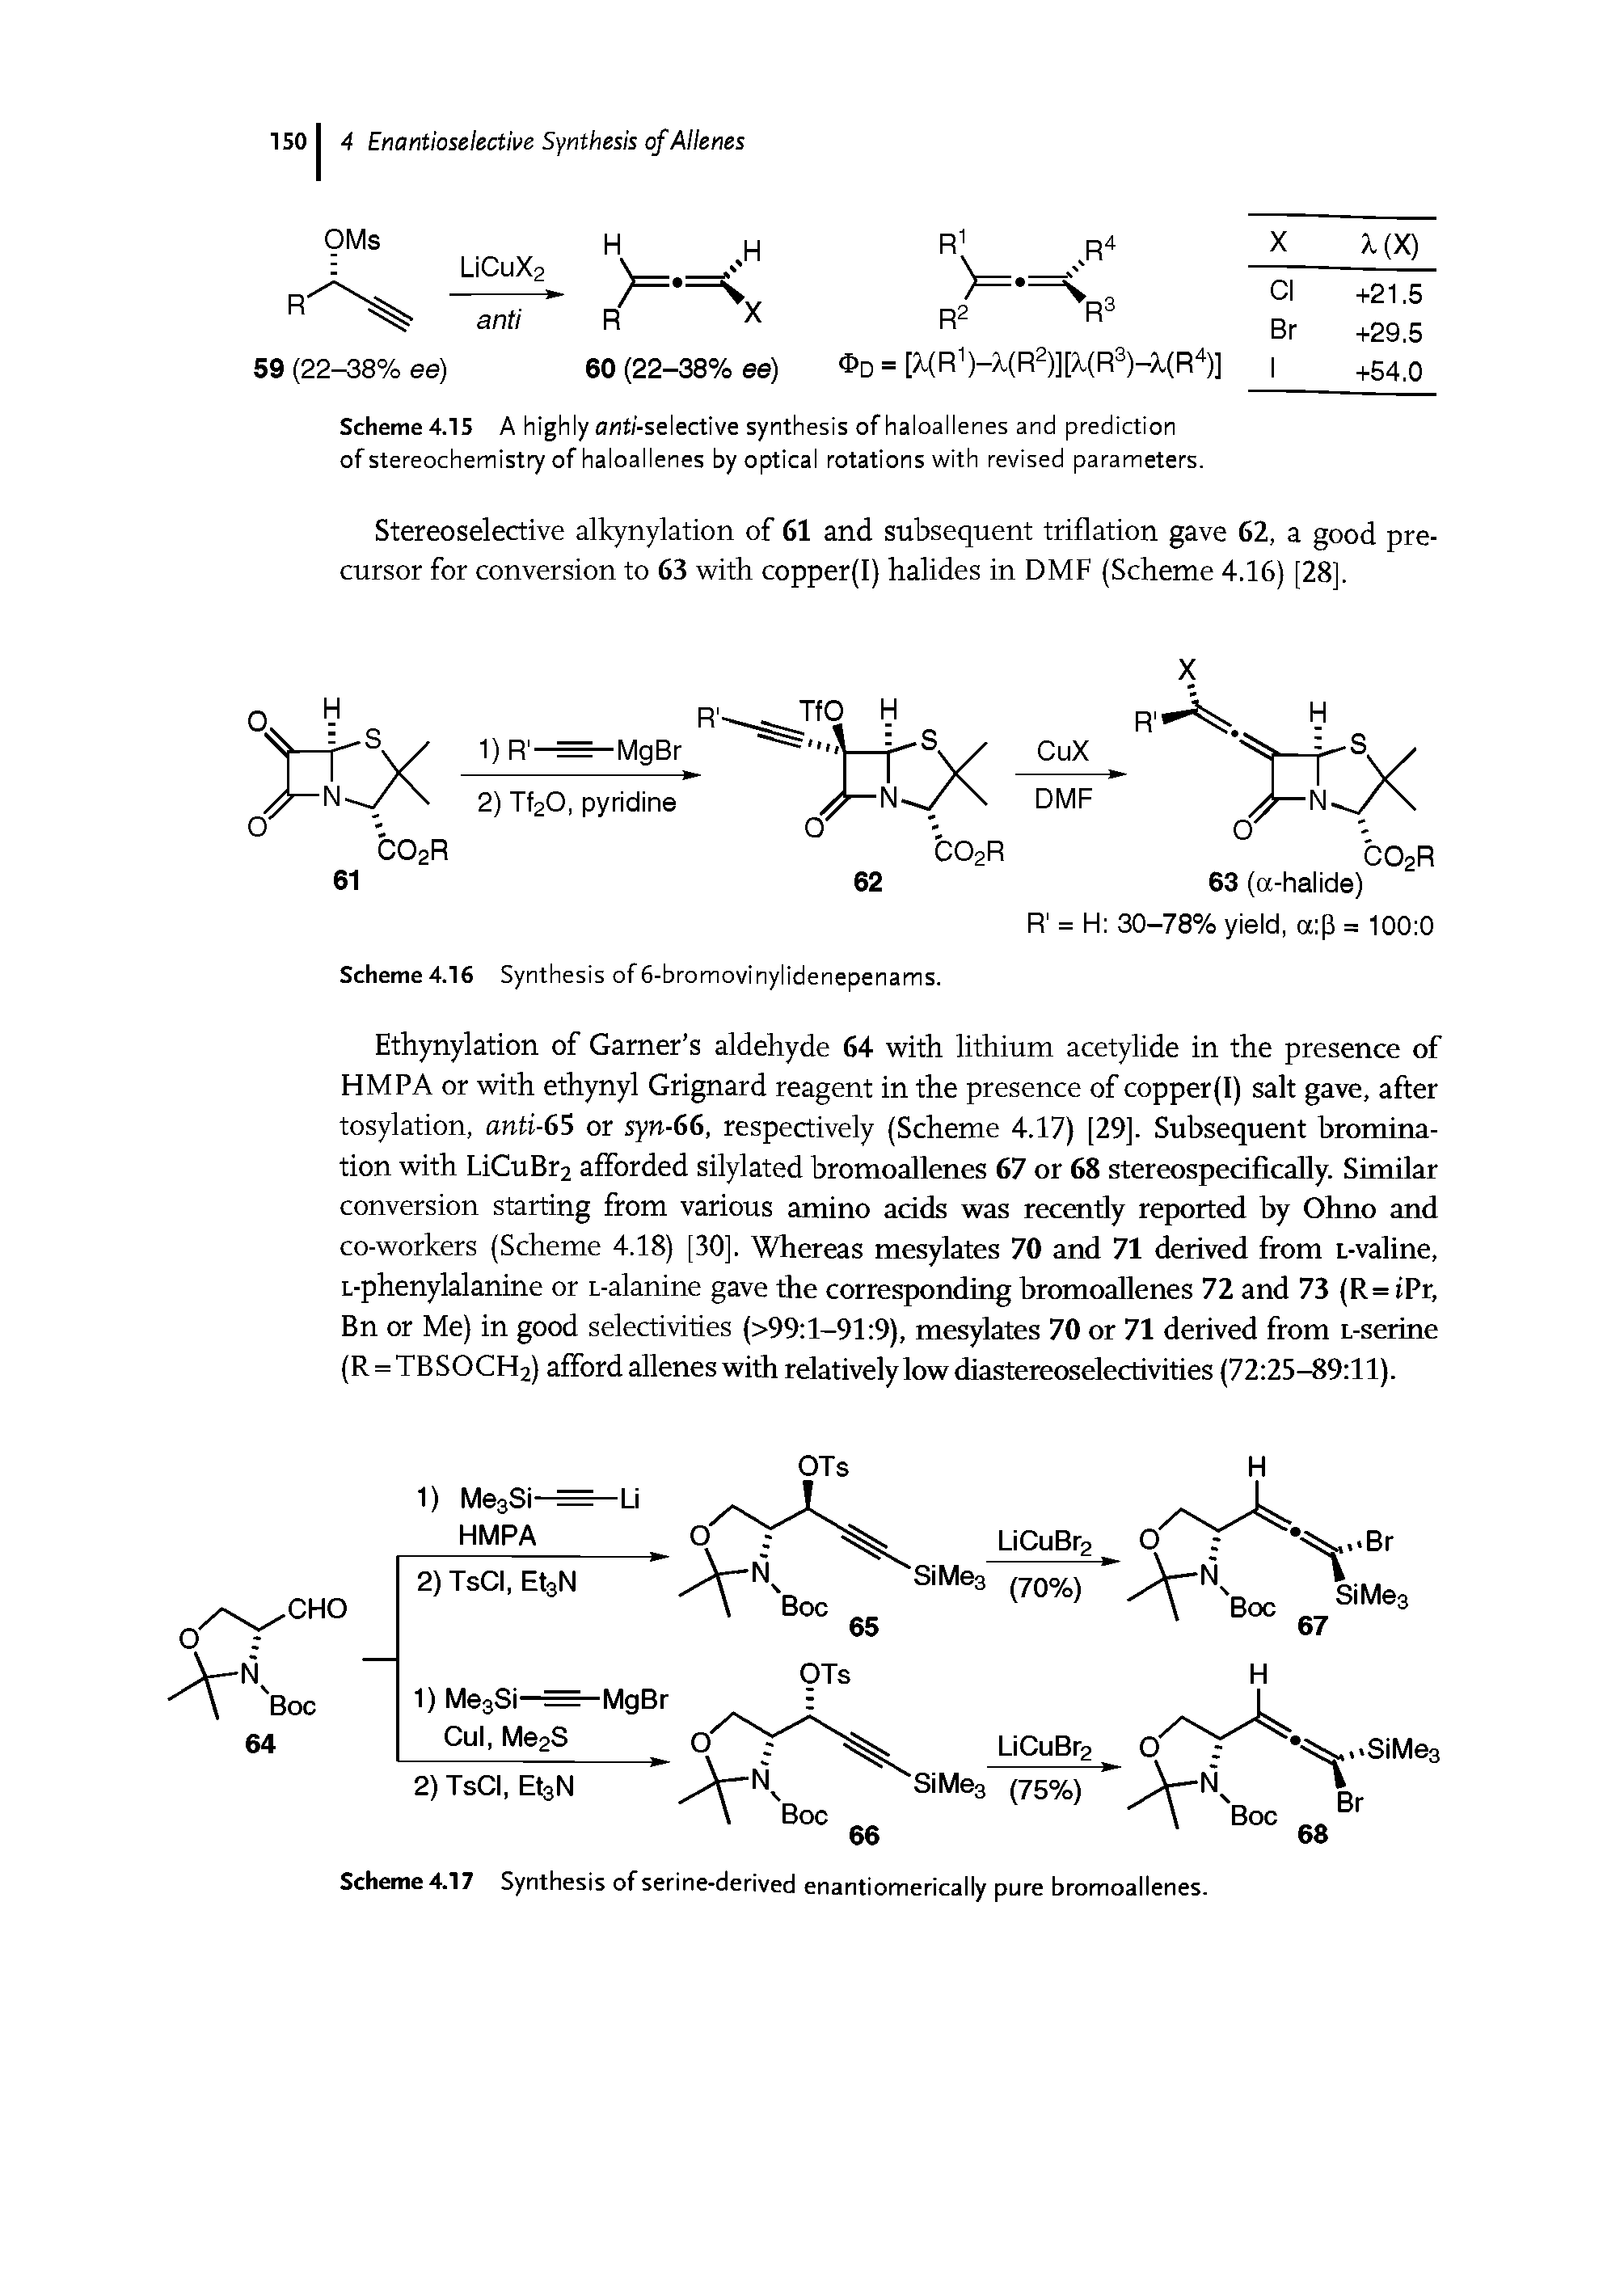 Scheme 4.15 A highly flnt/-selective synthesis of haloallenes and prediction of stereochemistry of haloallenes by optical rotations with revised parameters.